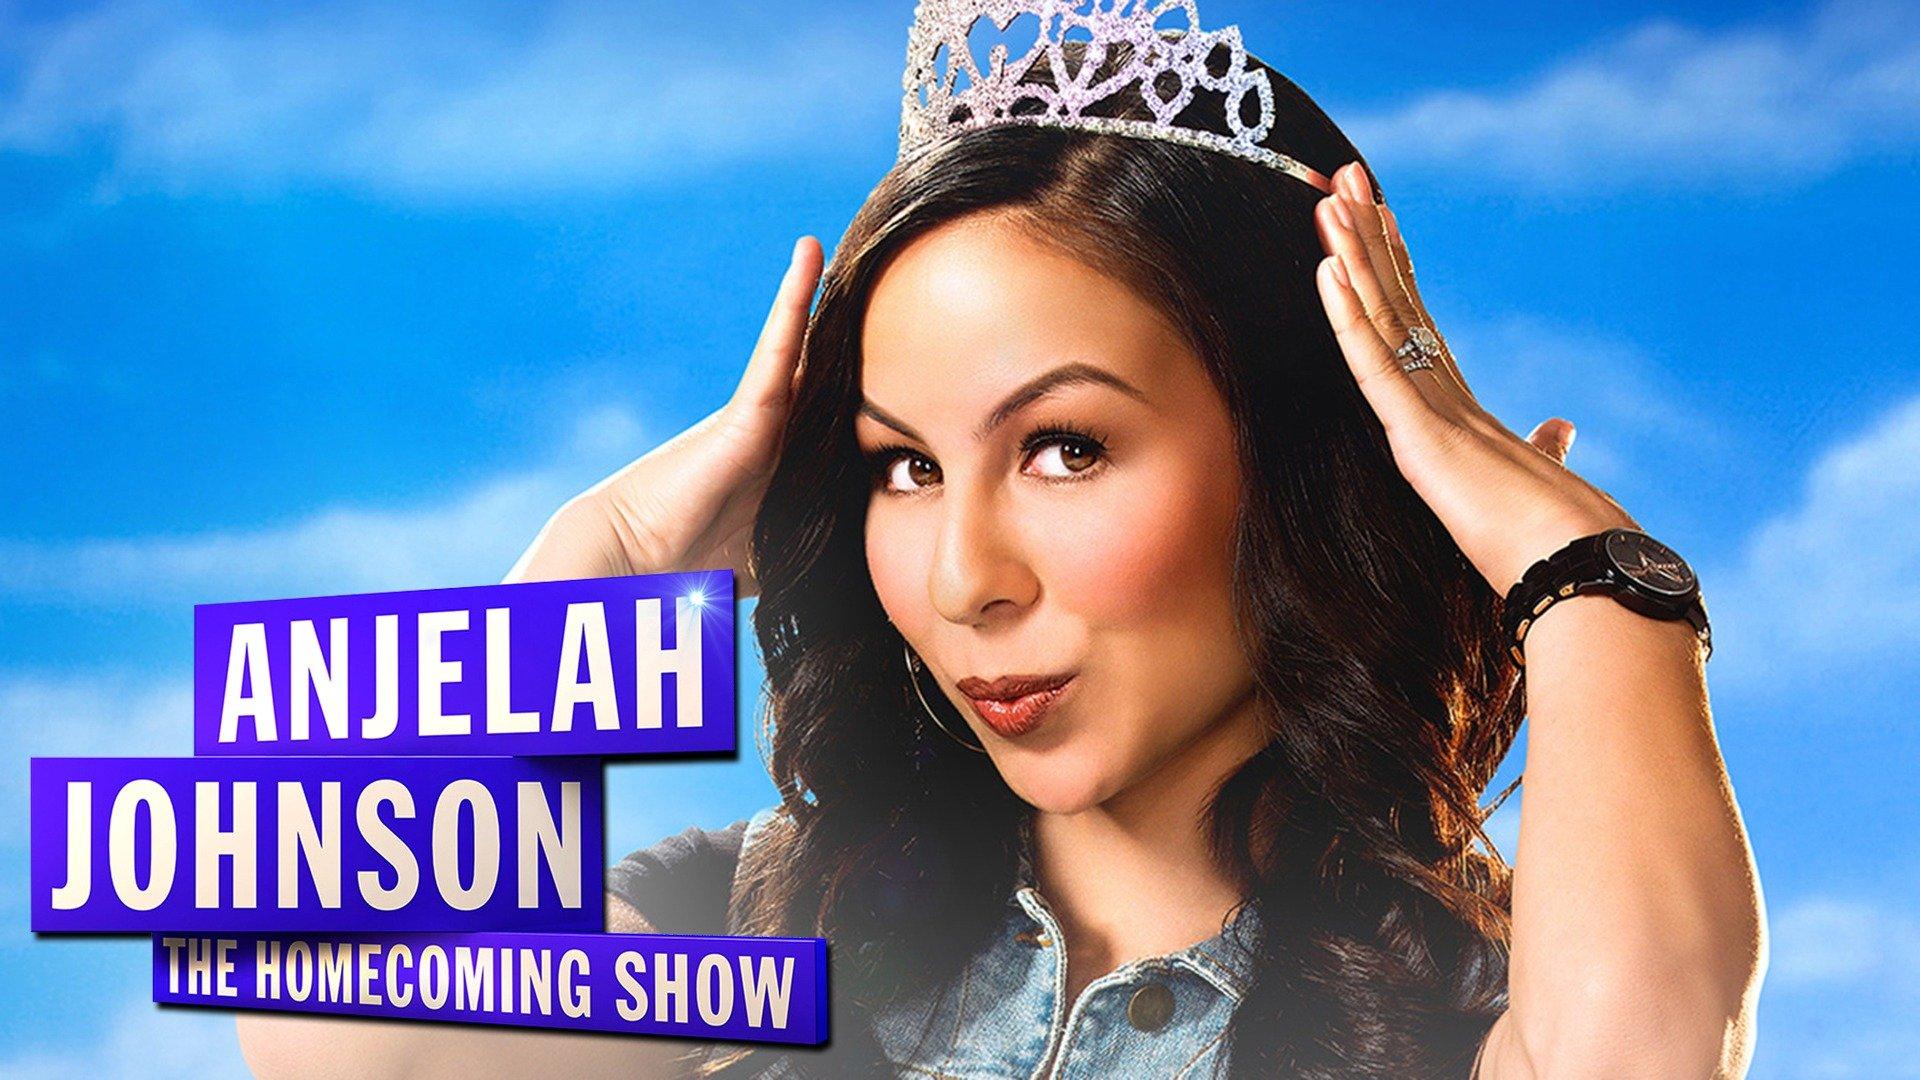 Watch Anjelah Johnson The Show Streaming Online on Philo